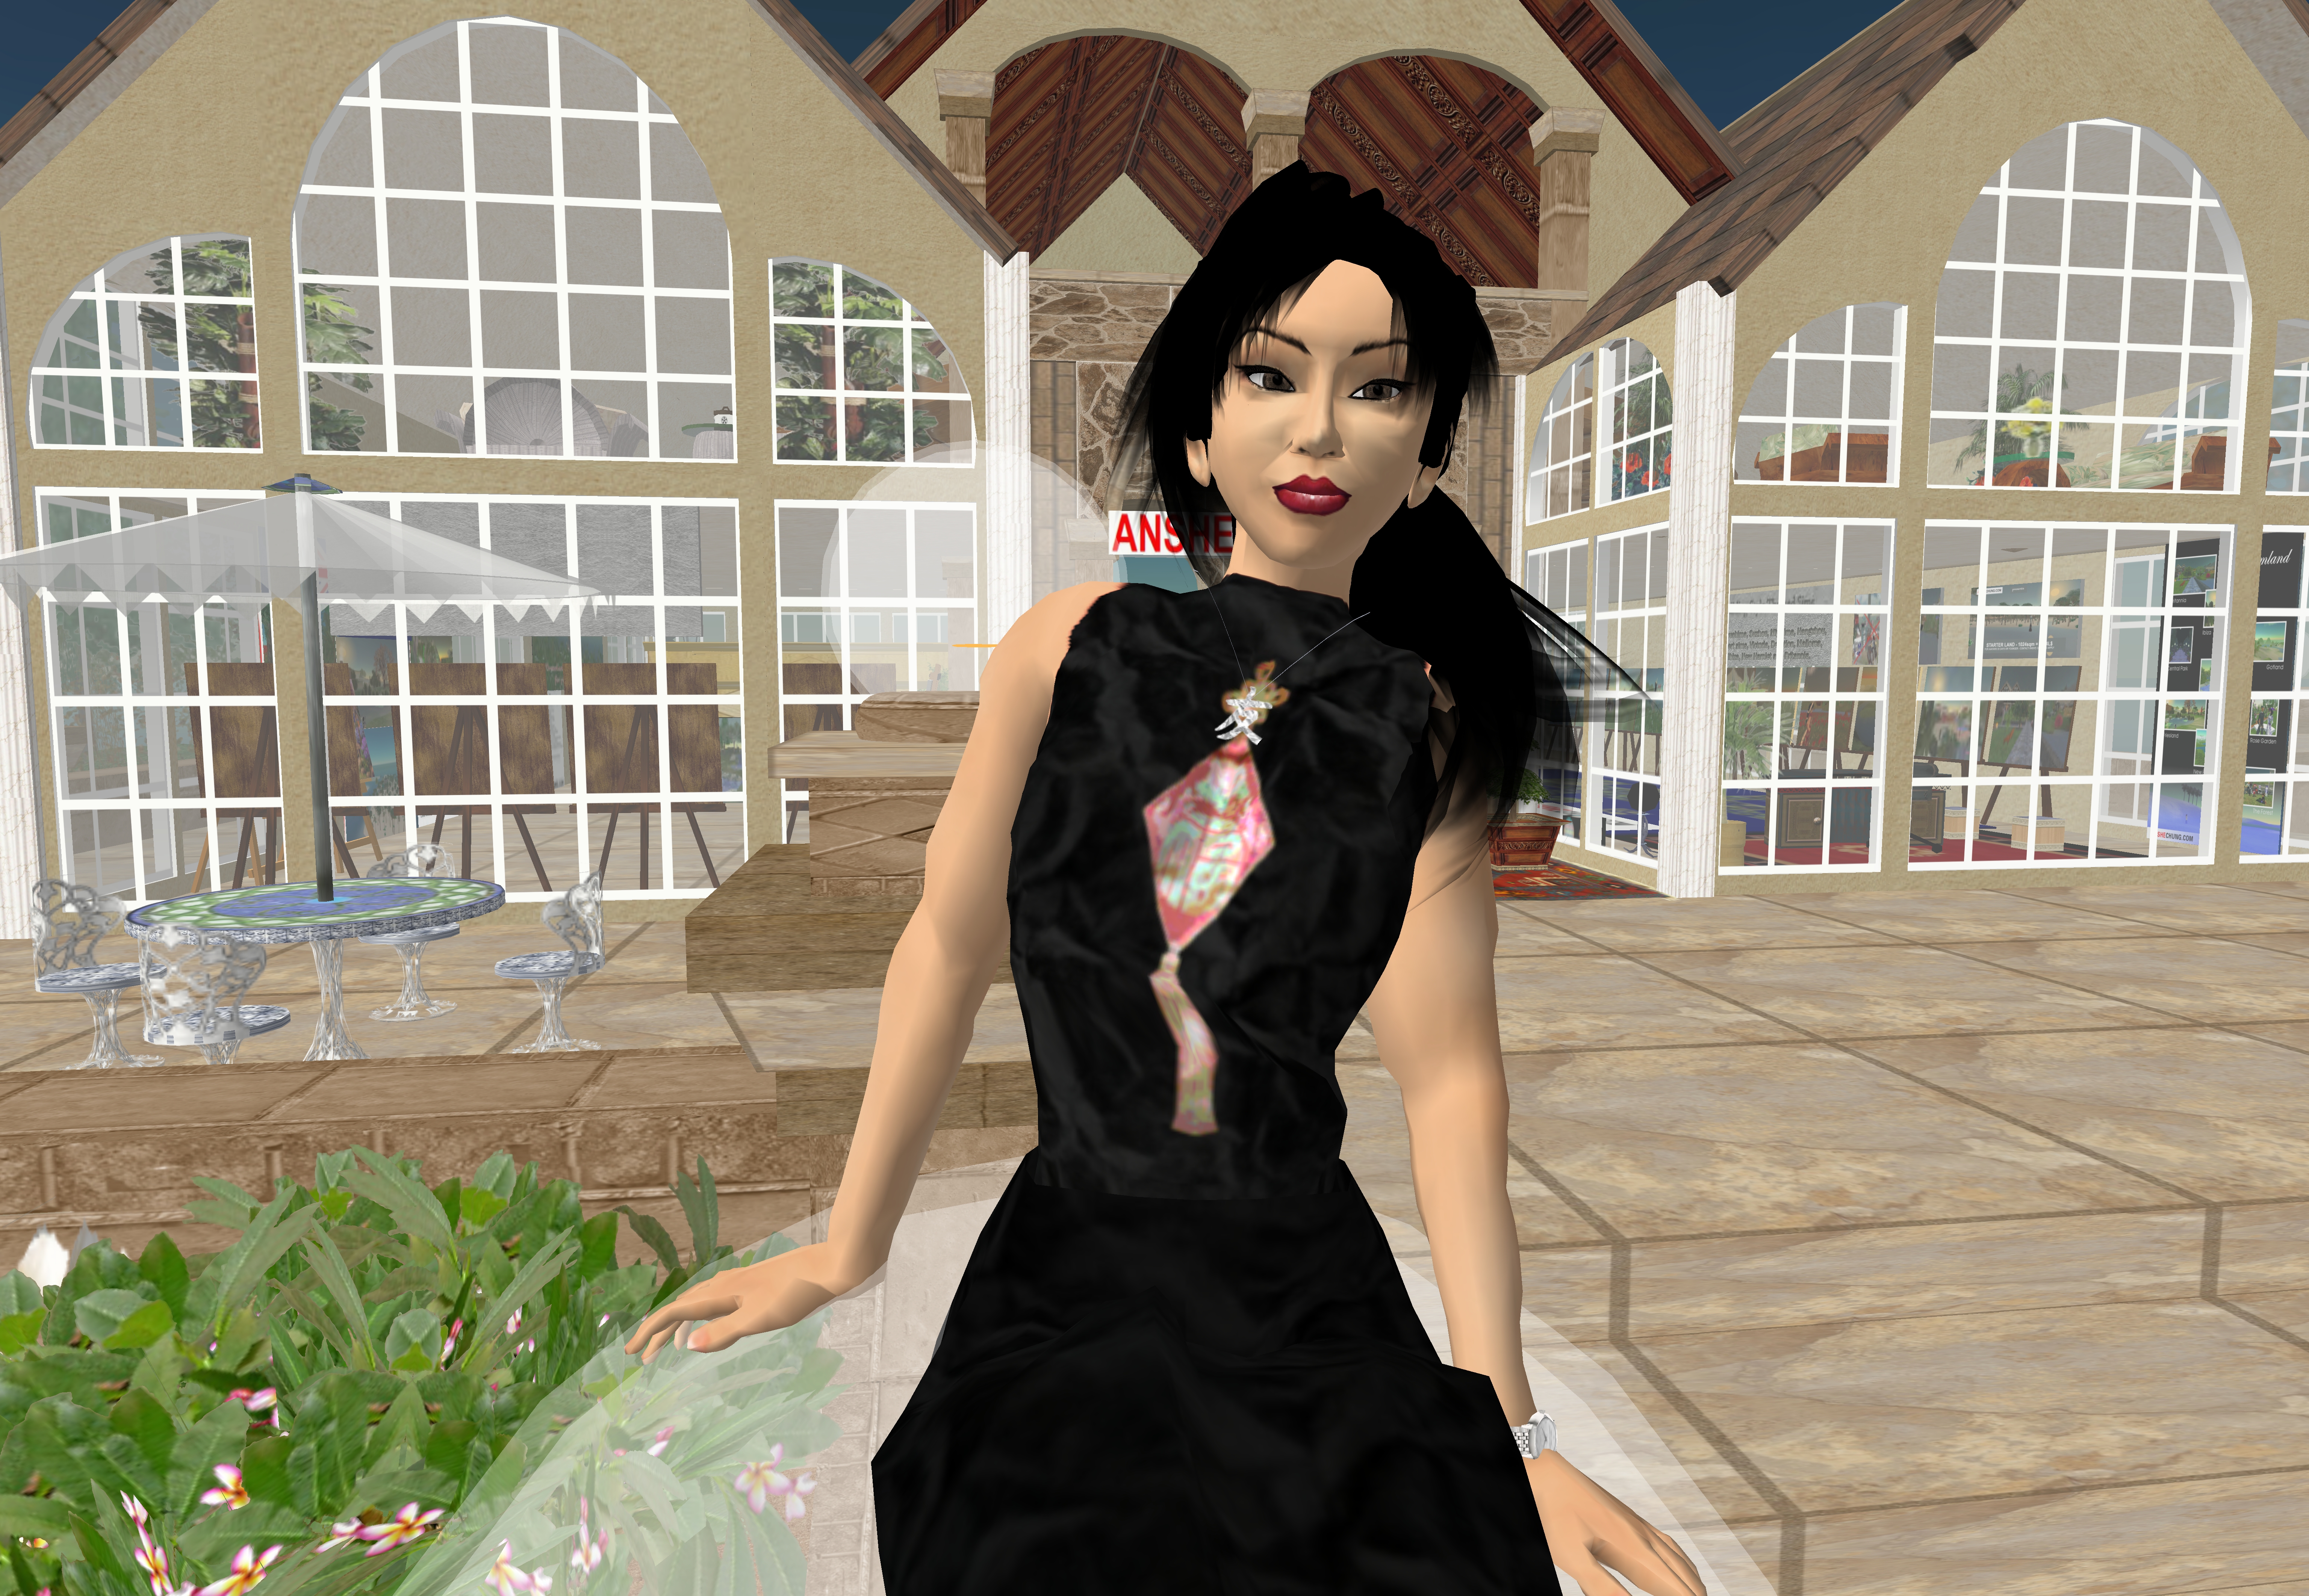 Ailin Graef's character, Anshe Chung, in Second Life.